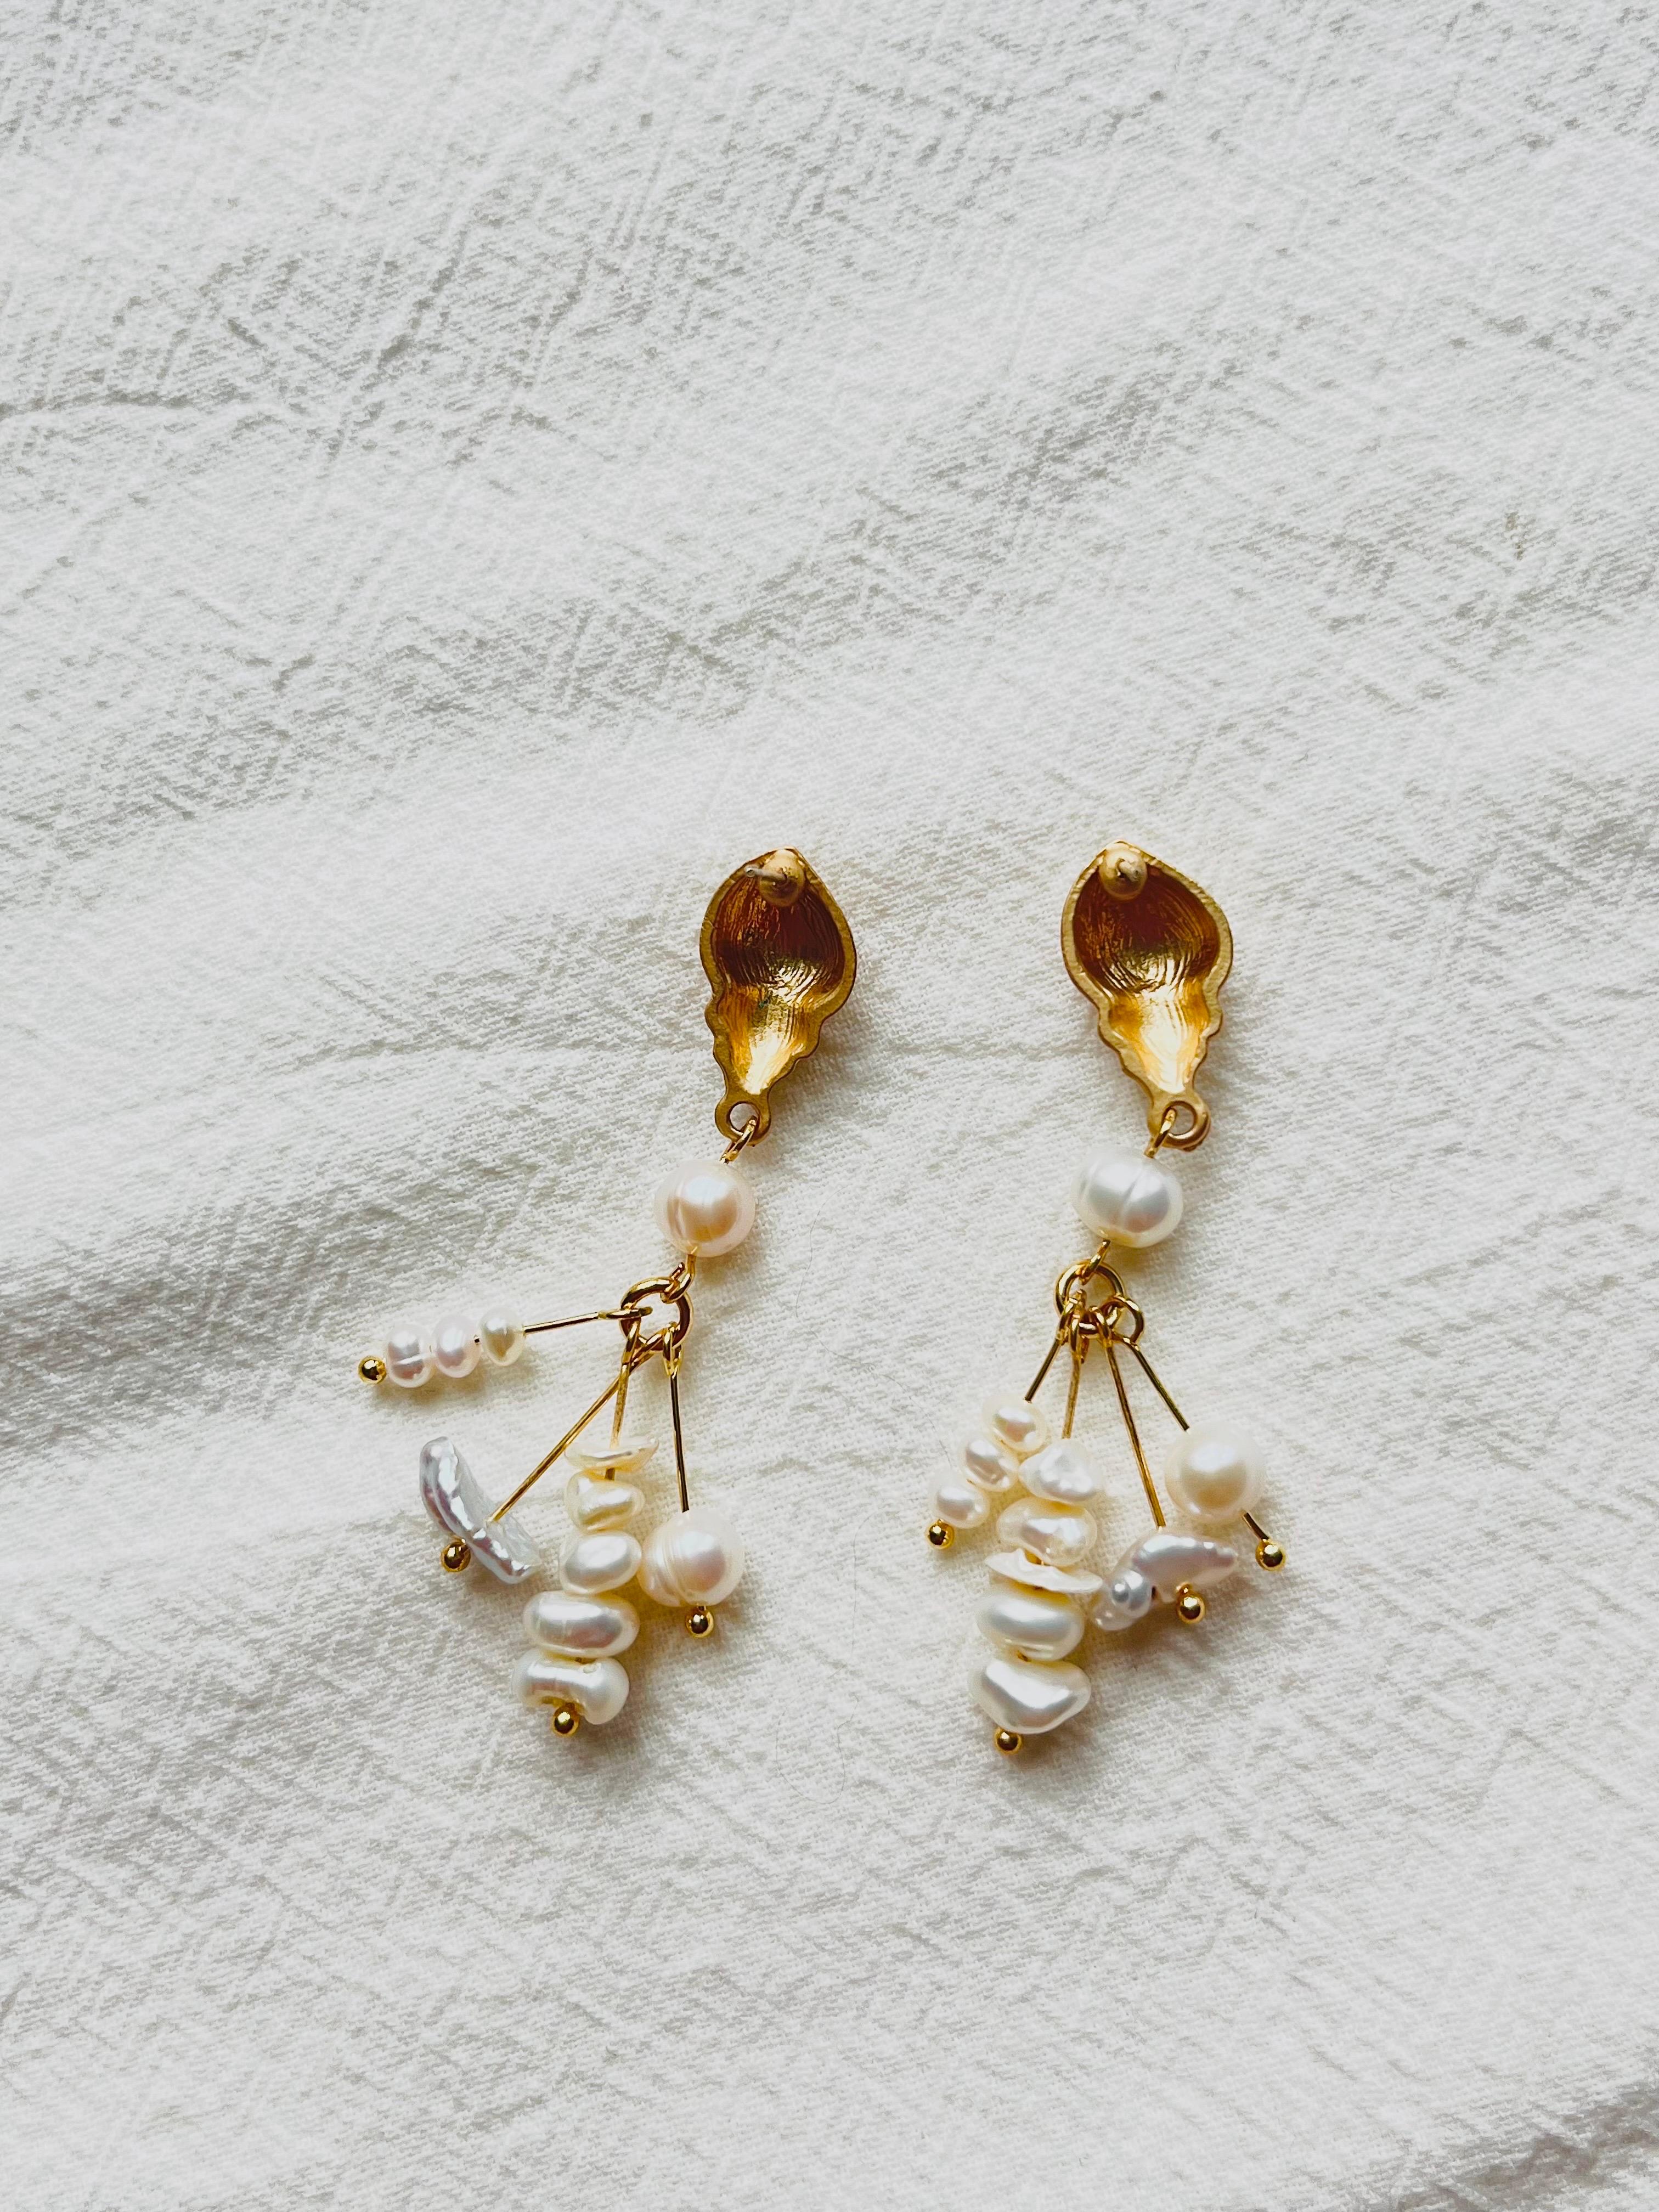 Natural White Irregular Cluster Pearls Tassel Conch Shell Gold Pierced Earrings In New Condition For Sale In Wokingham, England